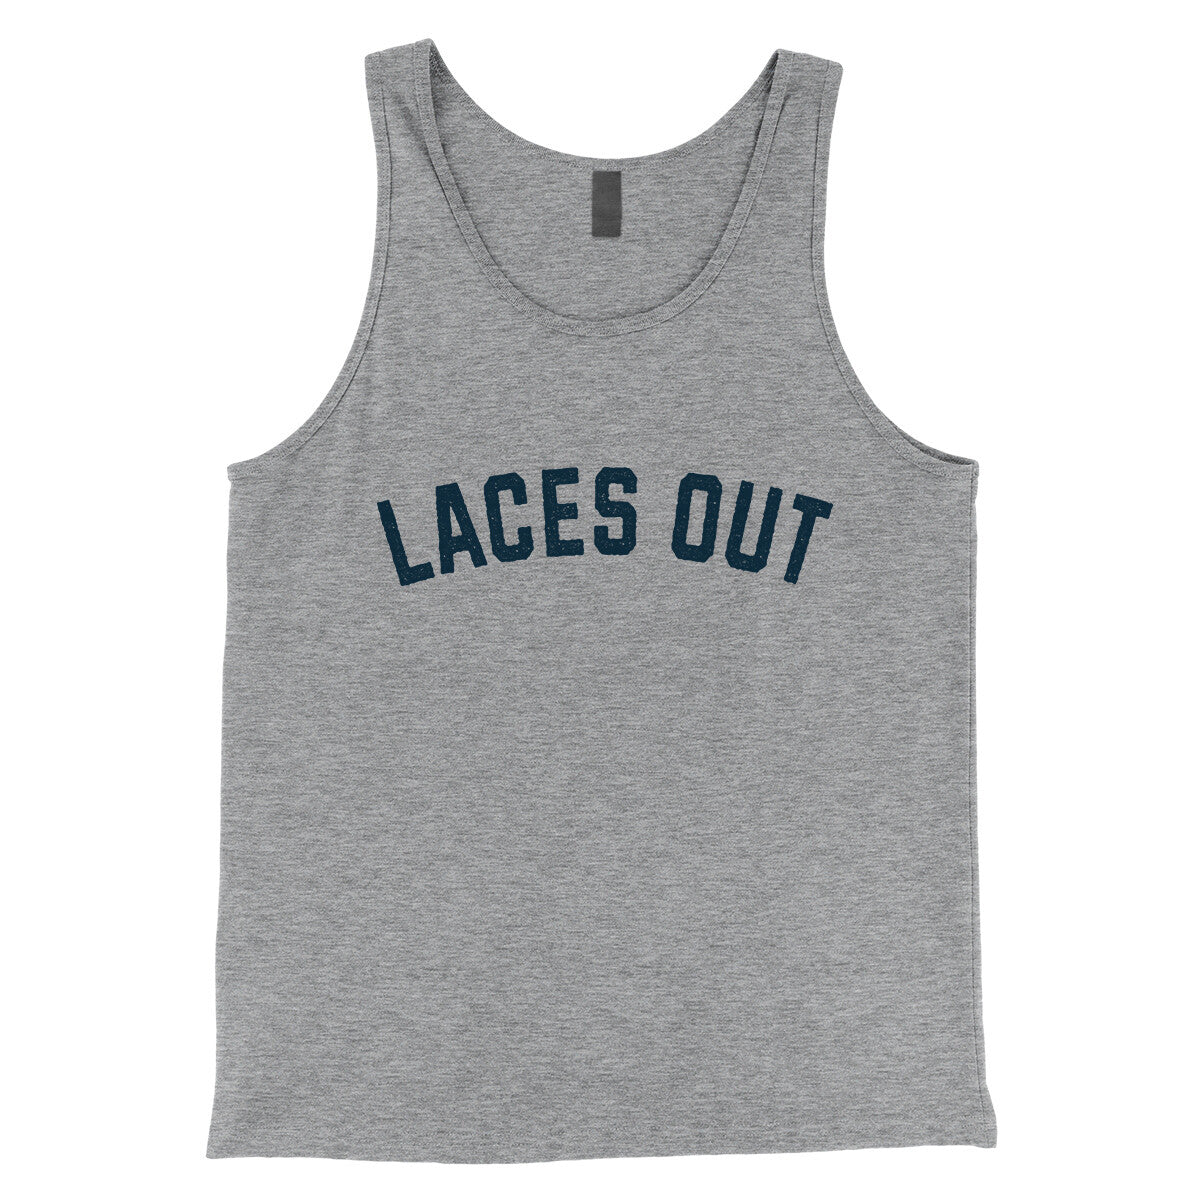 Laces Out in Athletic Heather Color